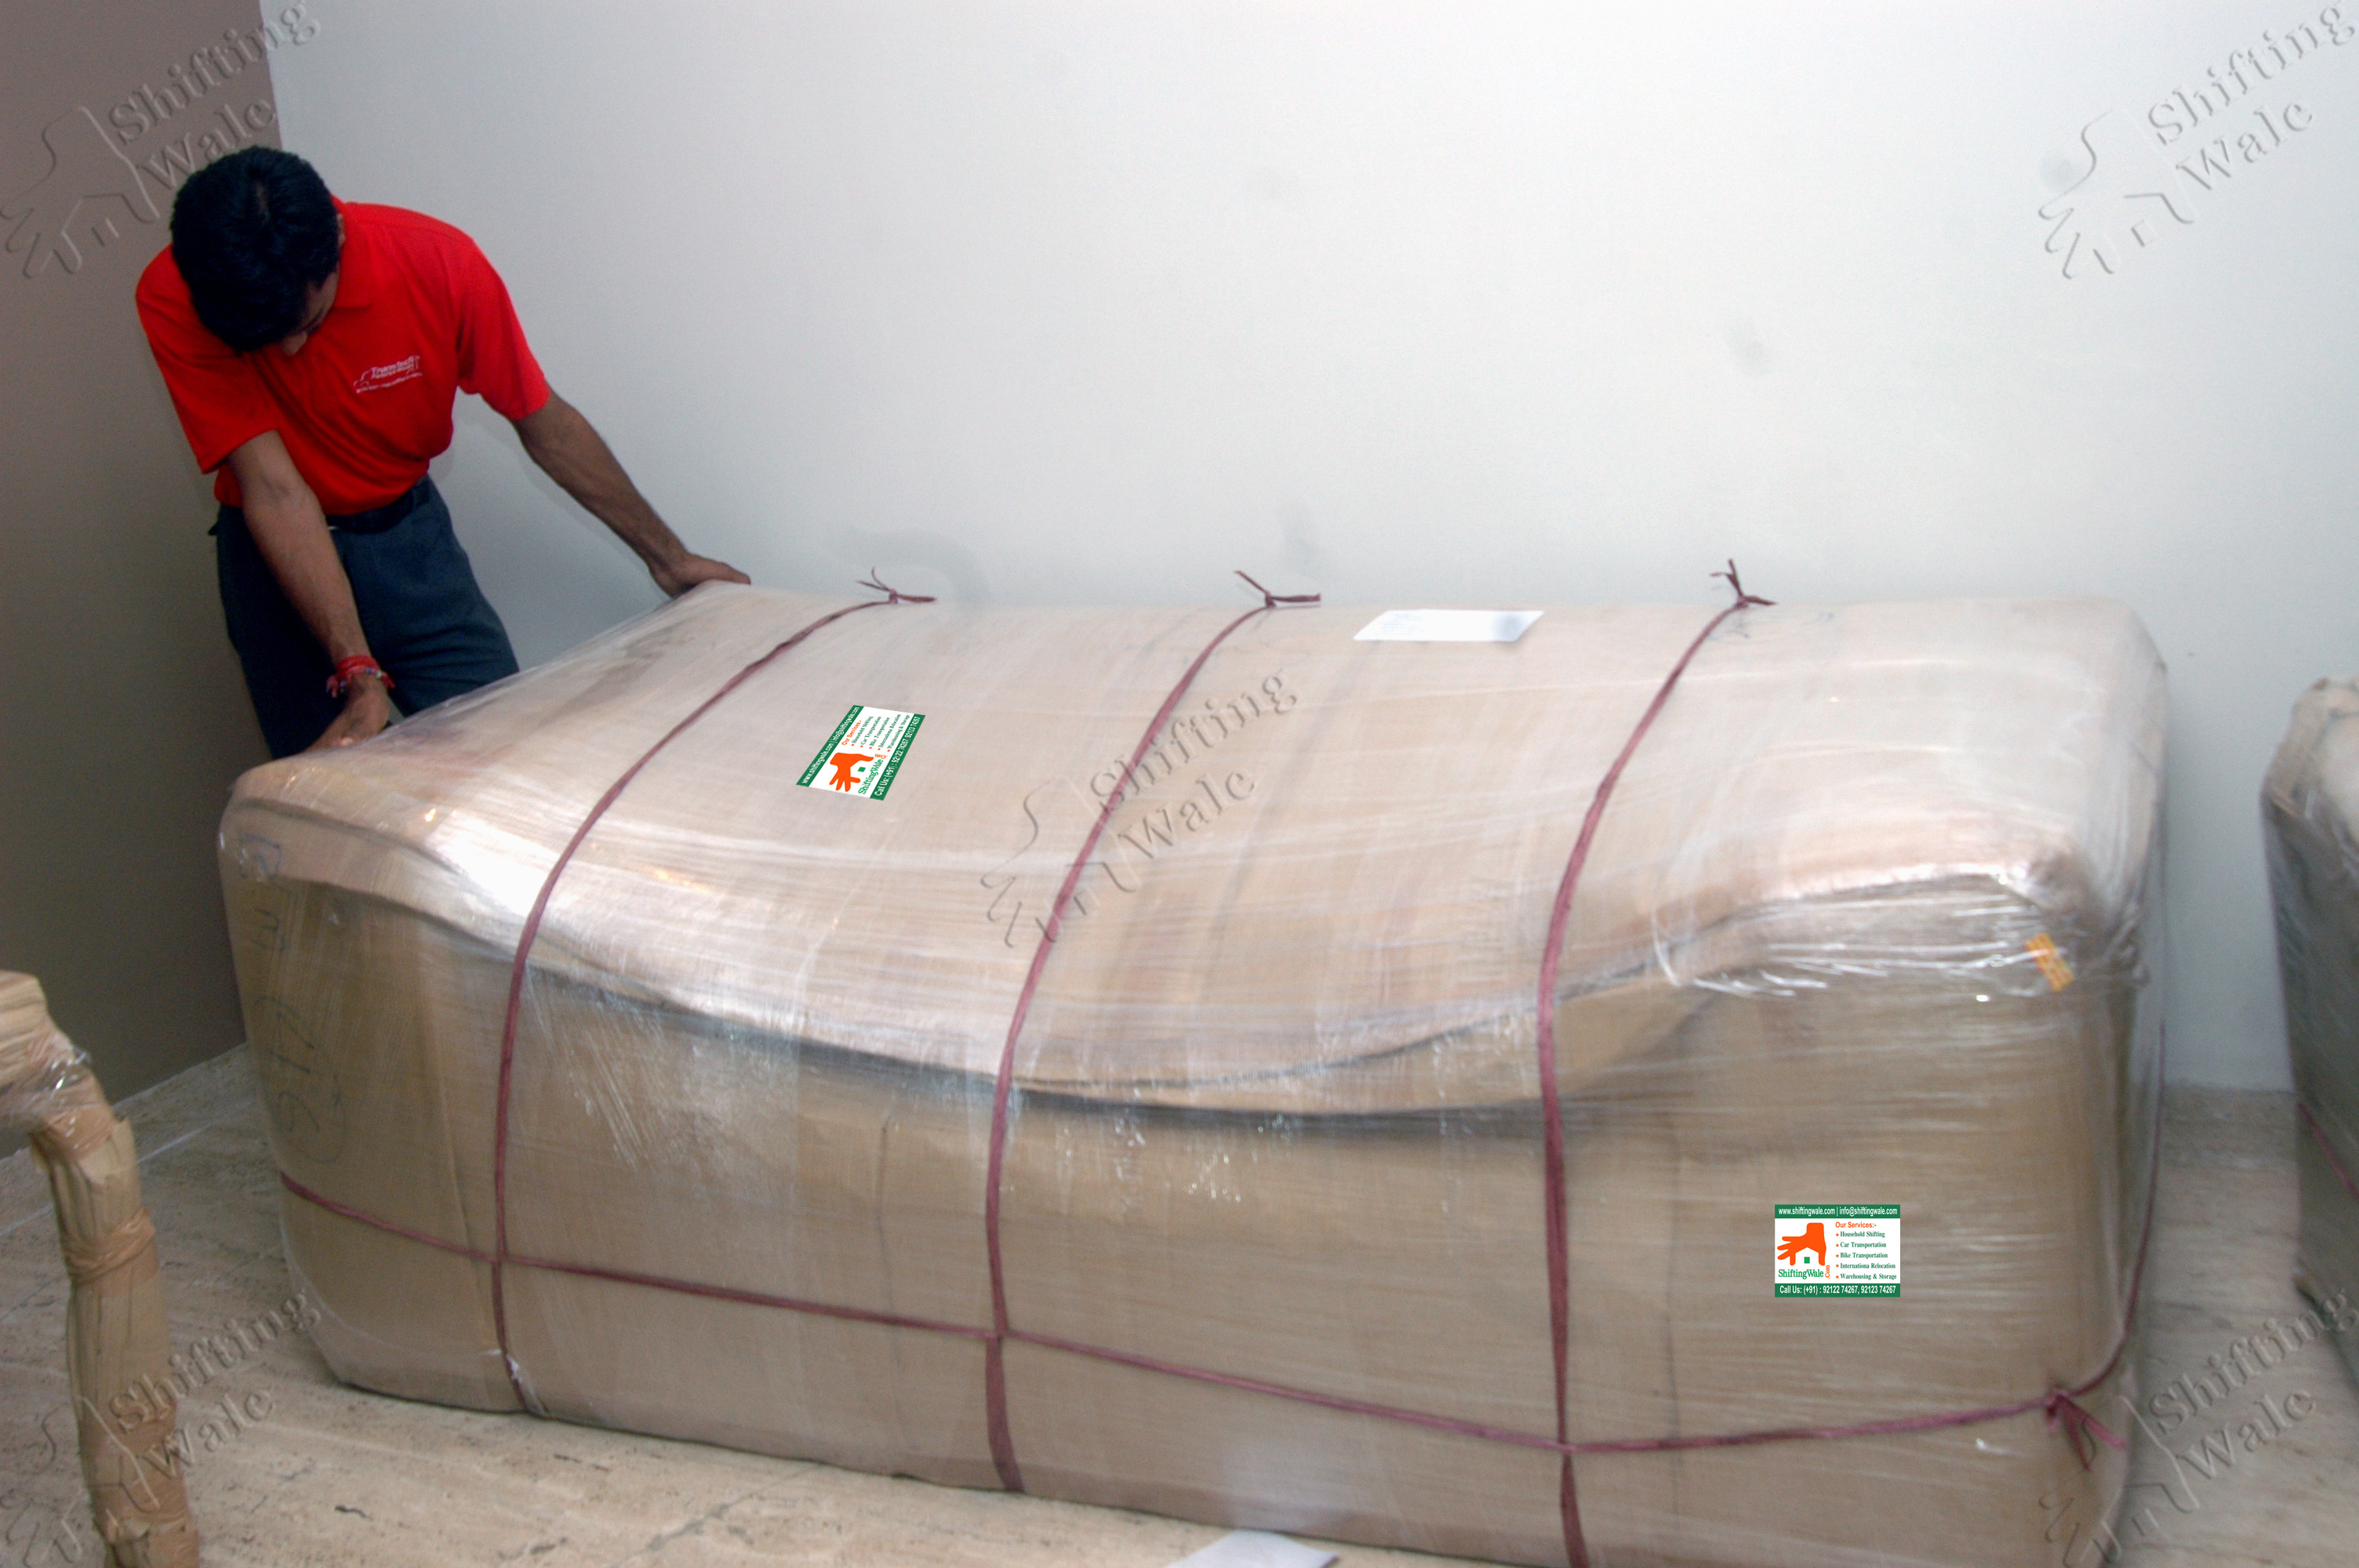 Packers and Movers in Noida, Movers and Packers in Noida